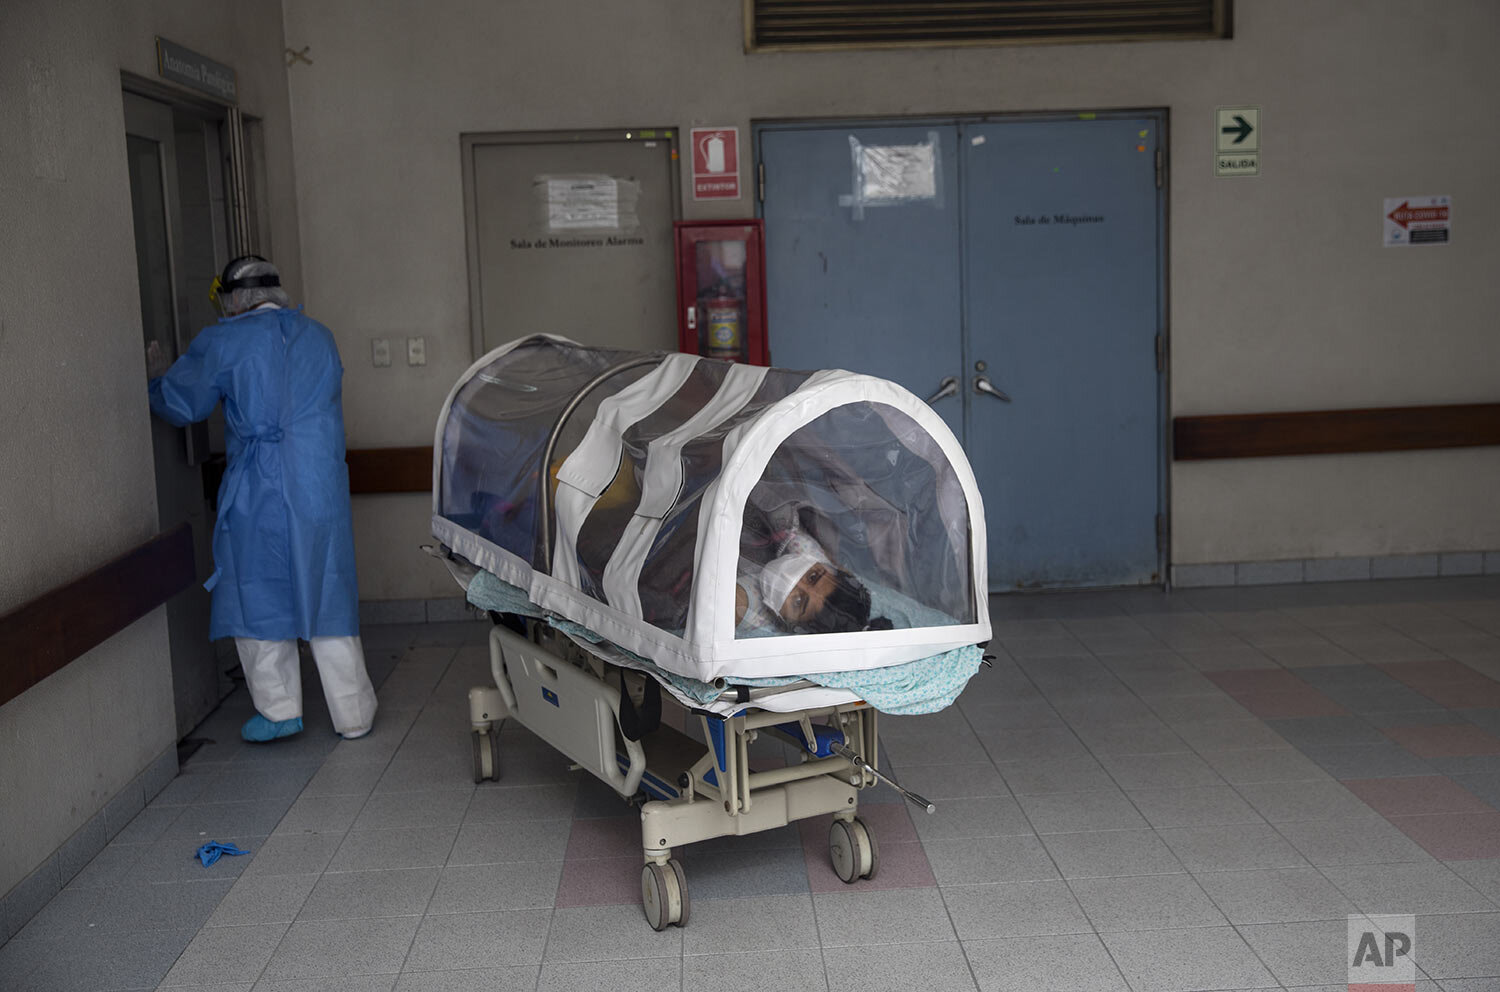  A woman looks out from a coronavirus isolation pod as she is transferred to a special ward for mothers with COVID-19 at the National Perinatal and Maternal Institute in Lima, Peru, Wednesday, July 29, 2020. (AP Photo/Rodrigo Abd) 